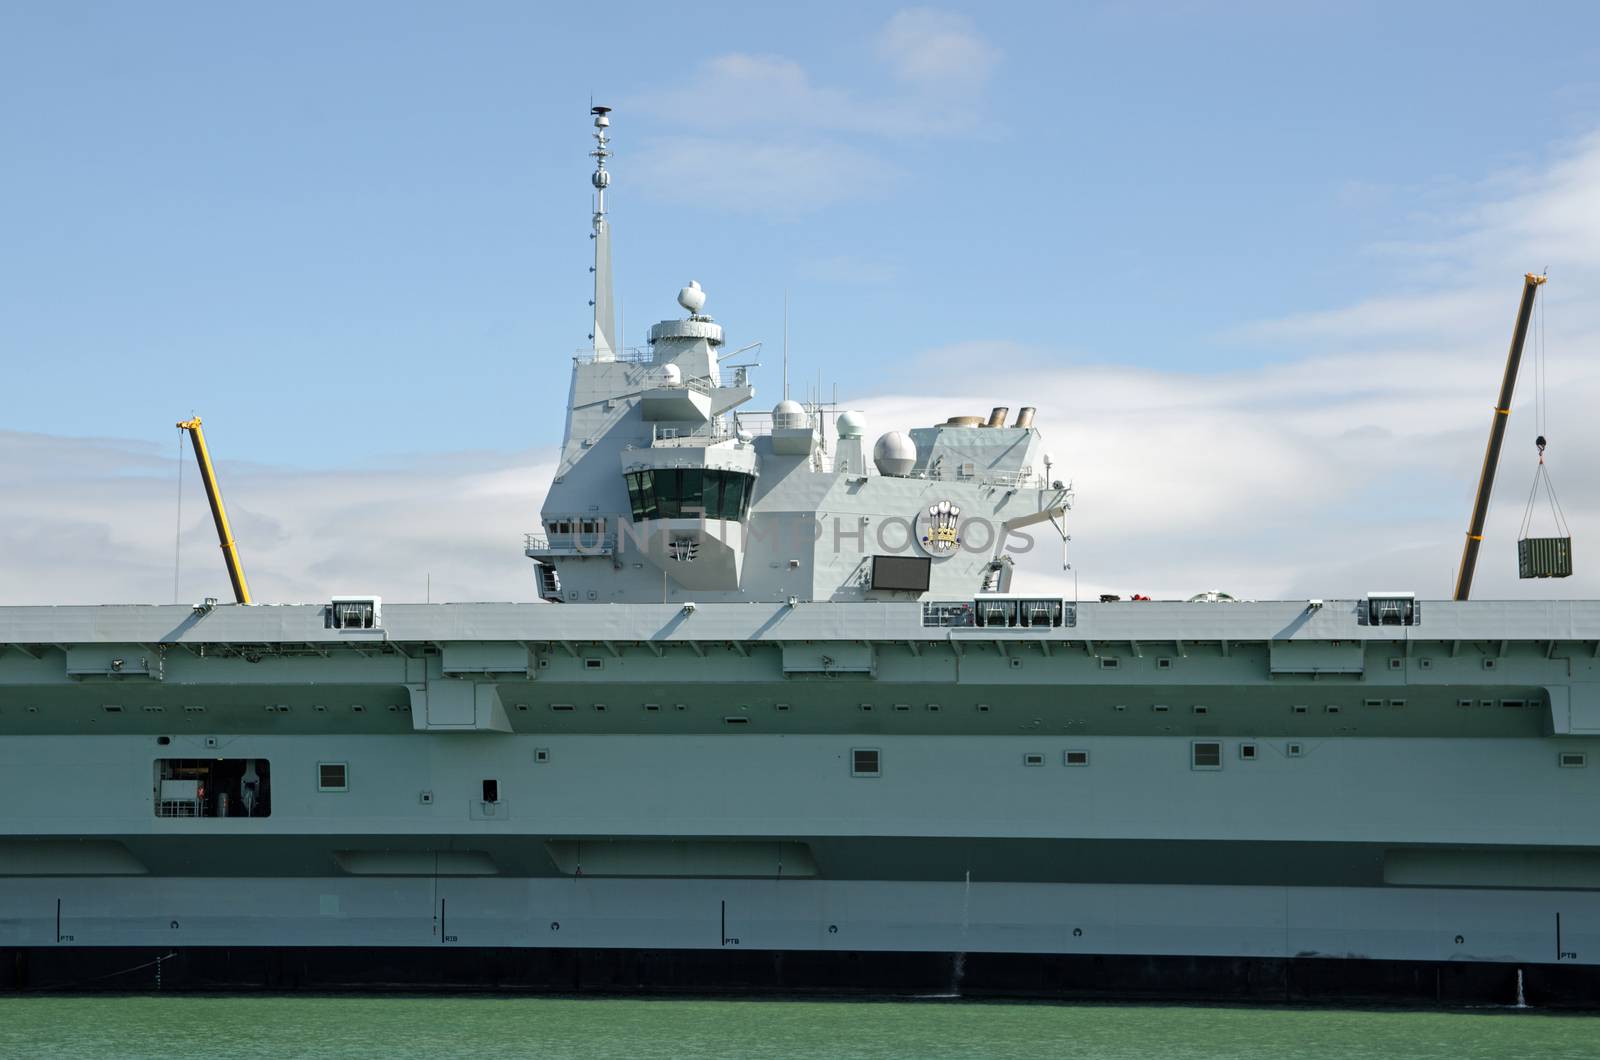 Superstructure and bridge of the Royal Navy aircraft carrier HMS Prince of Wales moored at Portsmouth Harbour, Hampshire.